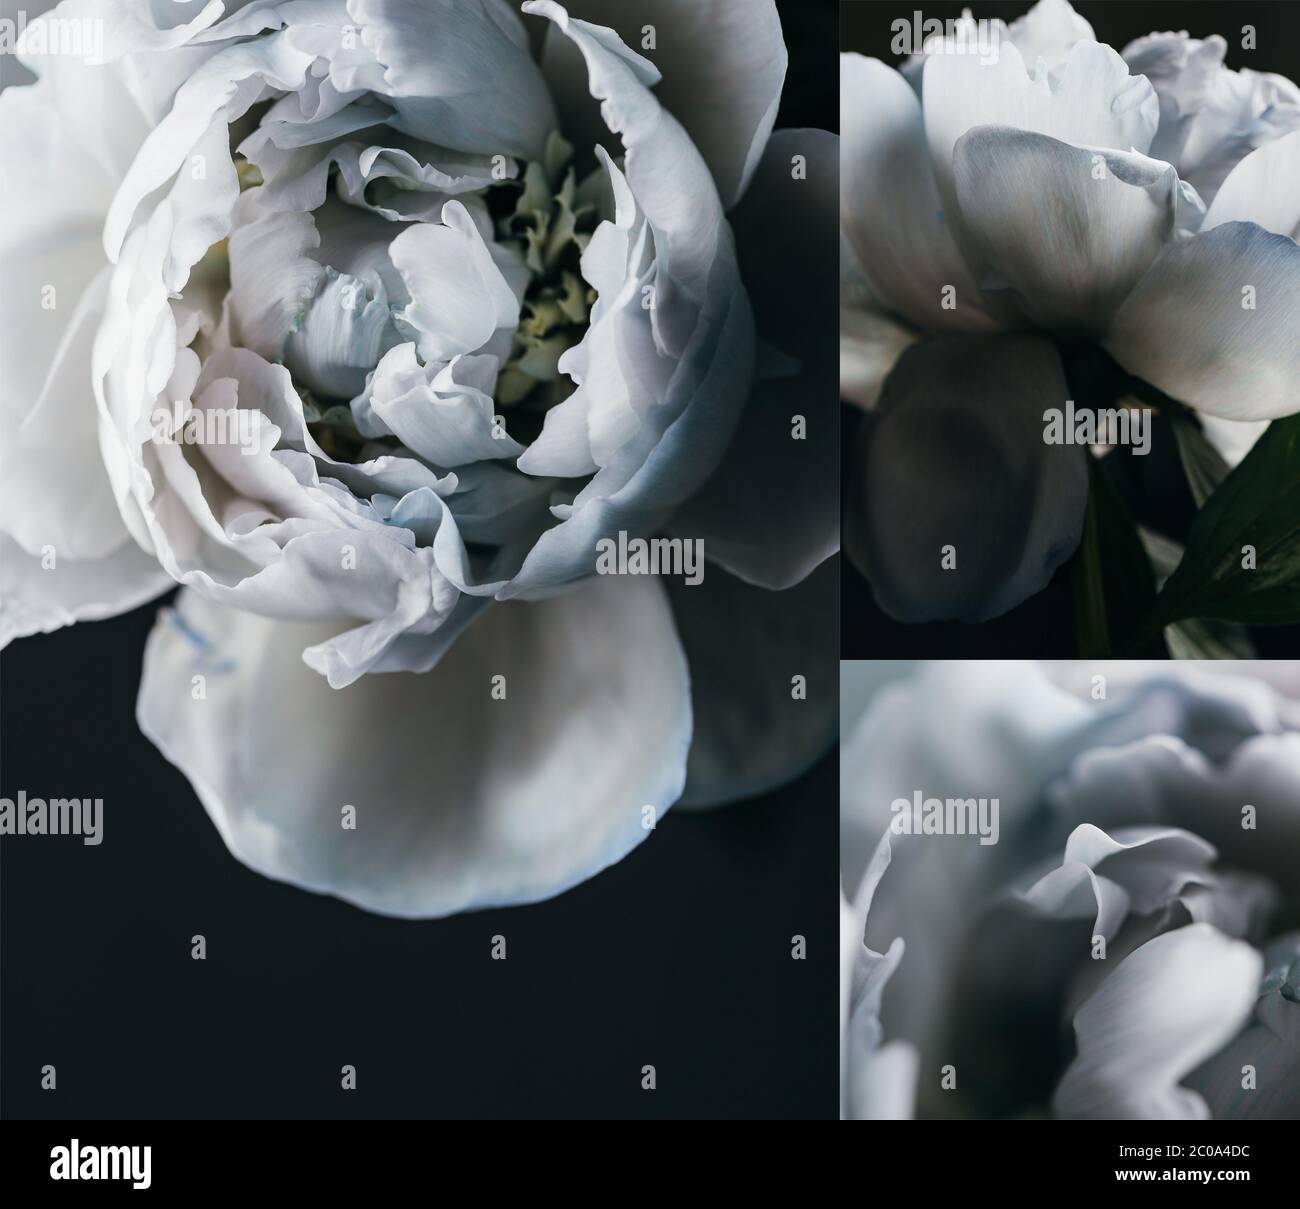 collage of blue peonies on black background Stock Photo